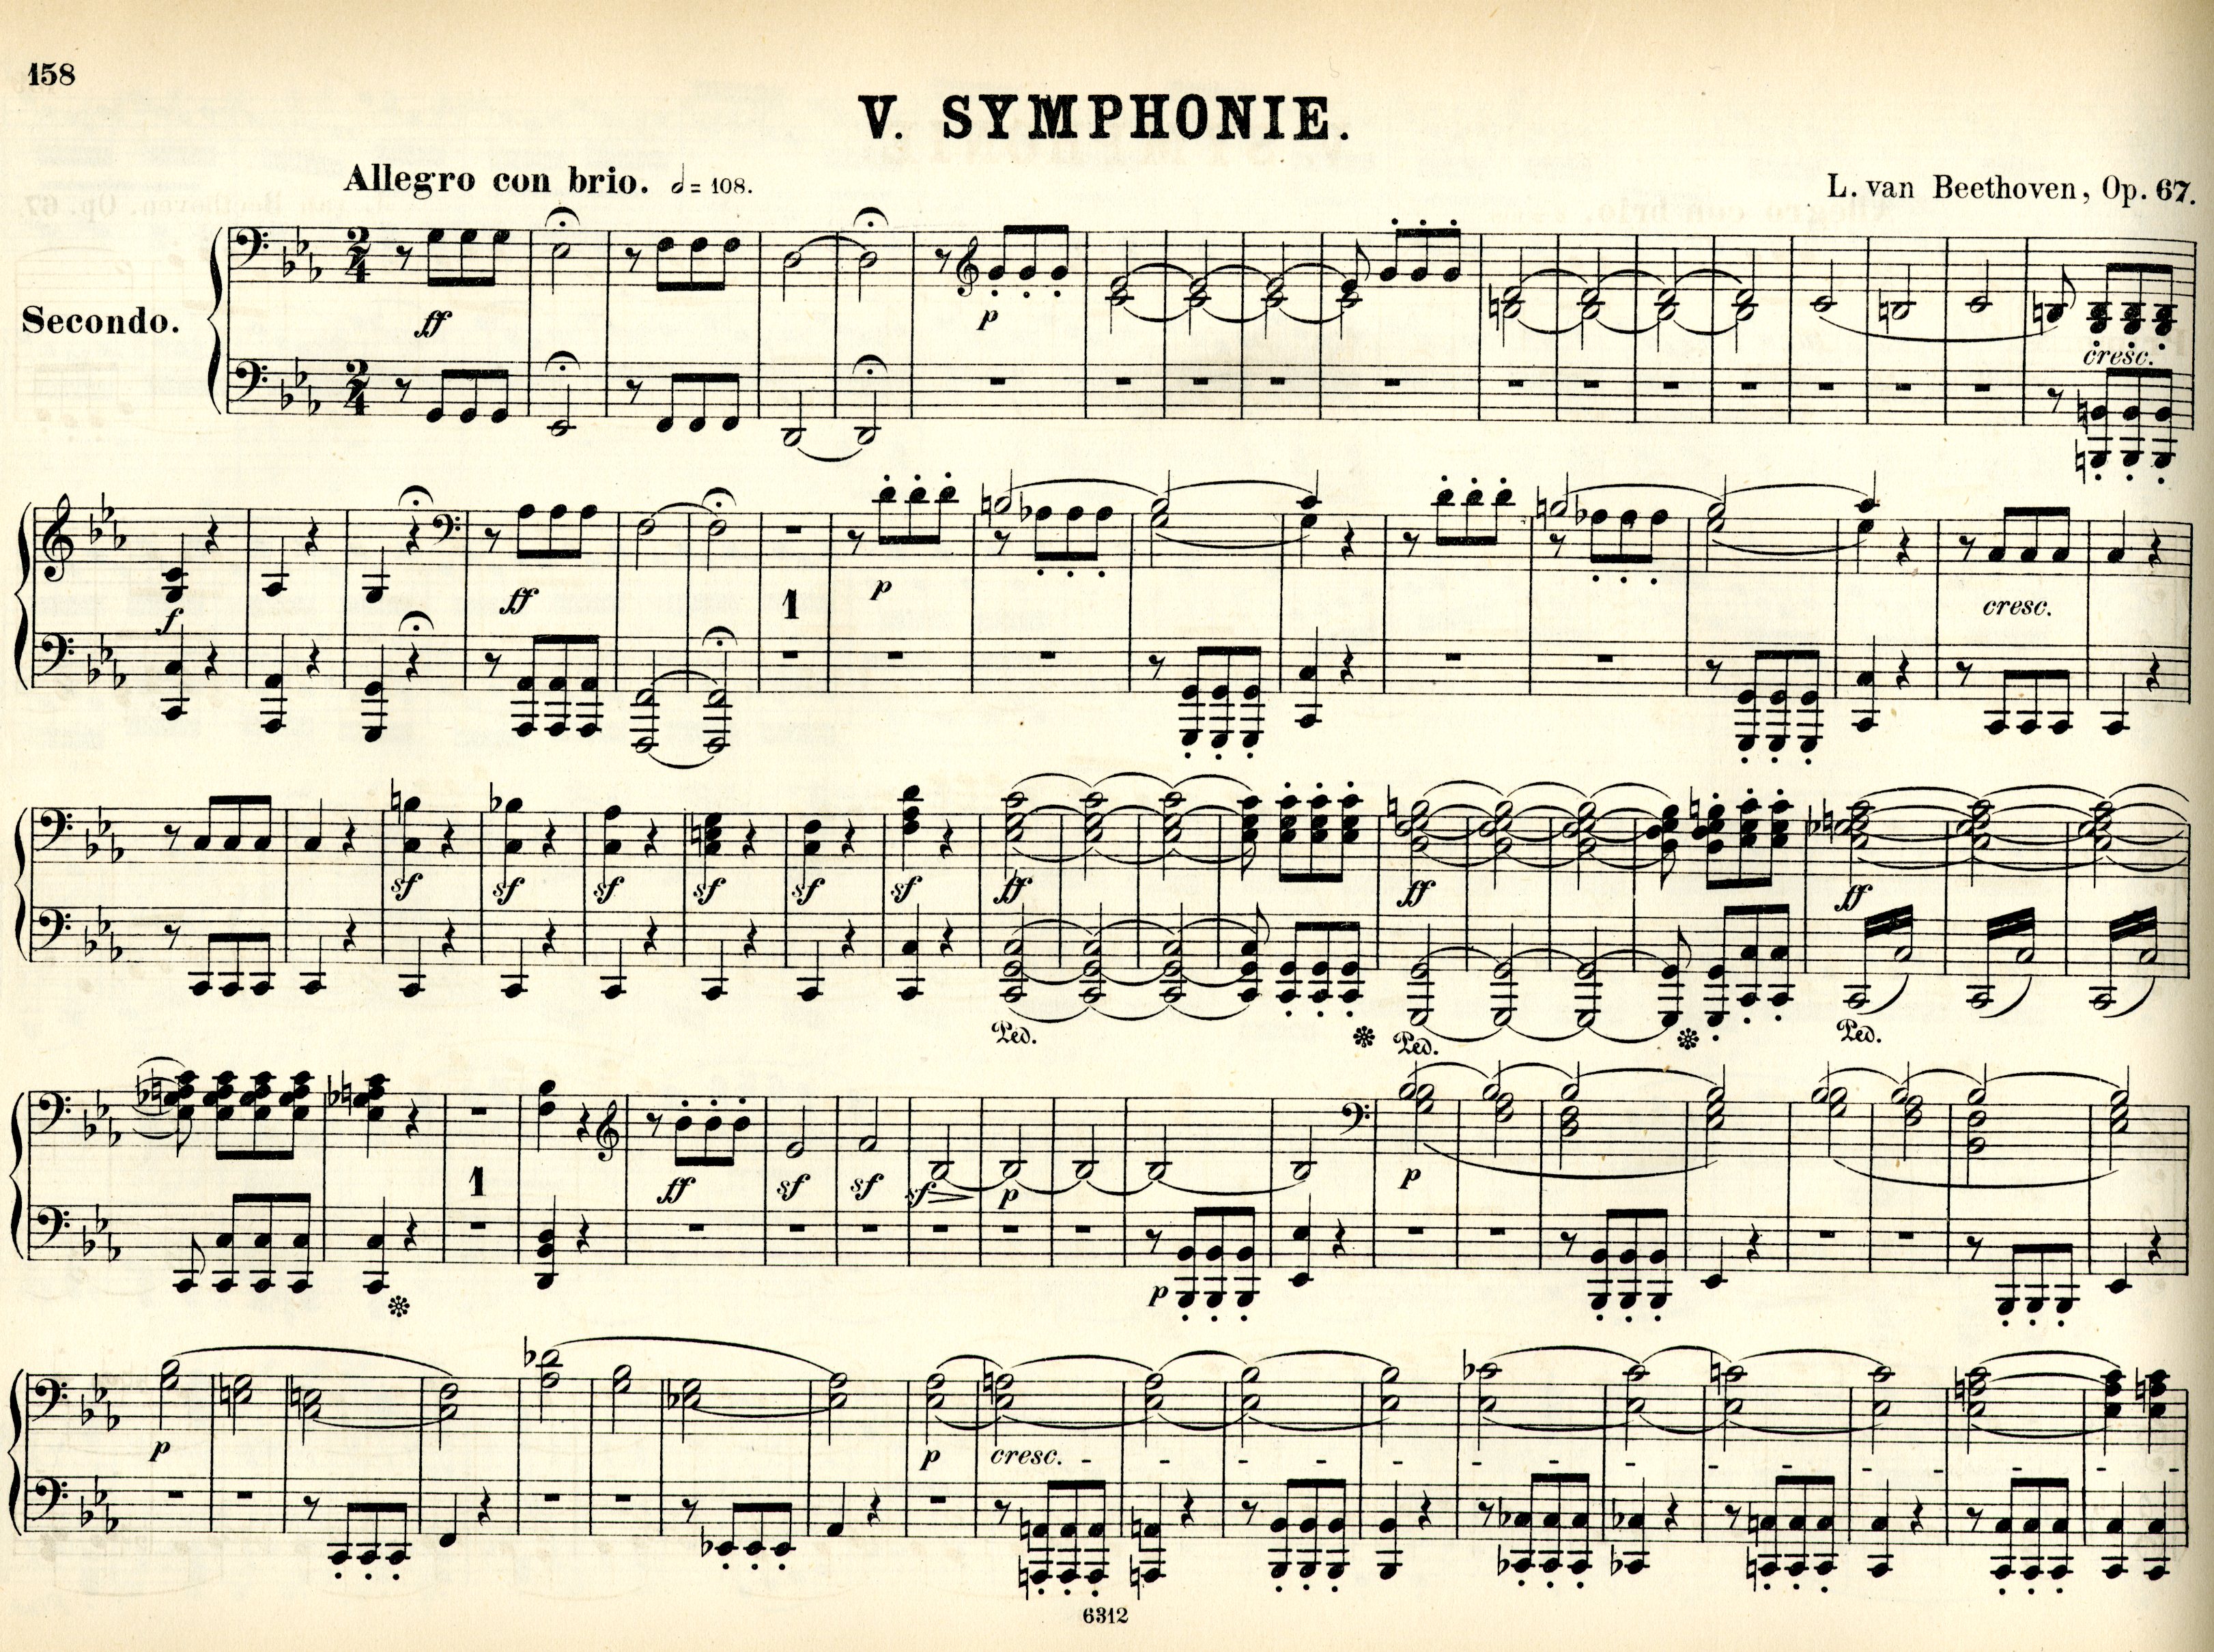 Beethoven's Syphonien, Fifth Symphony